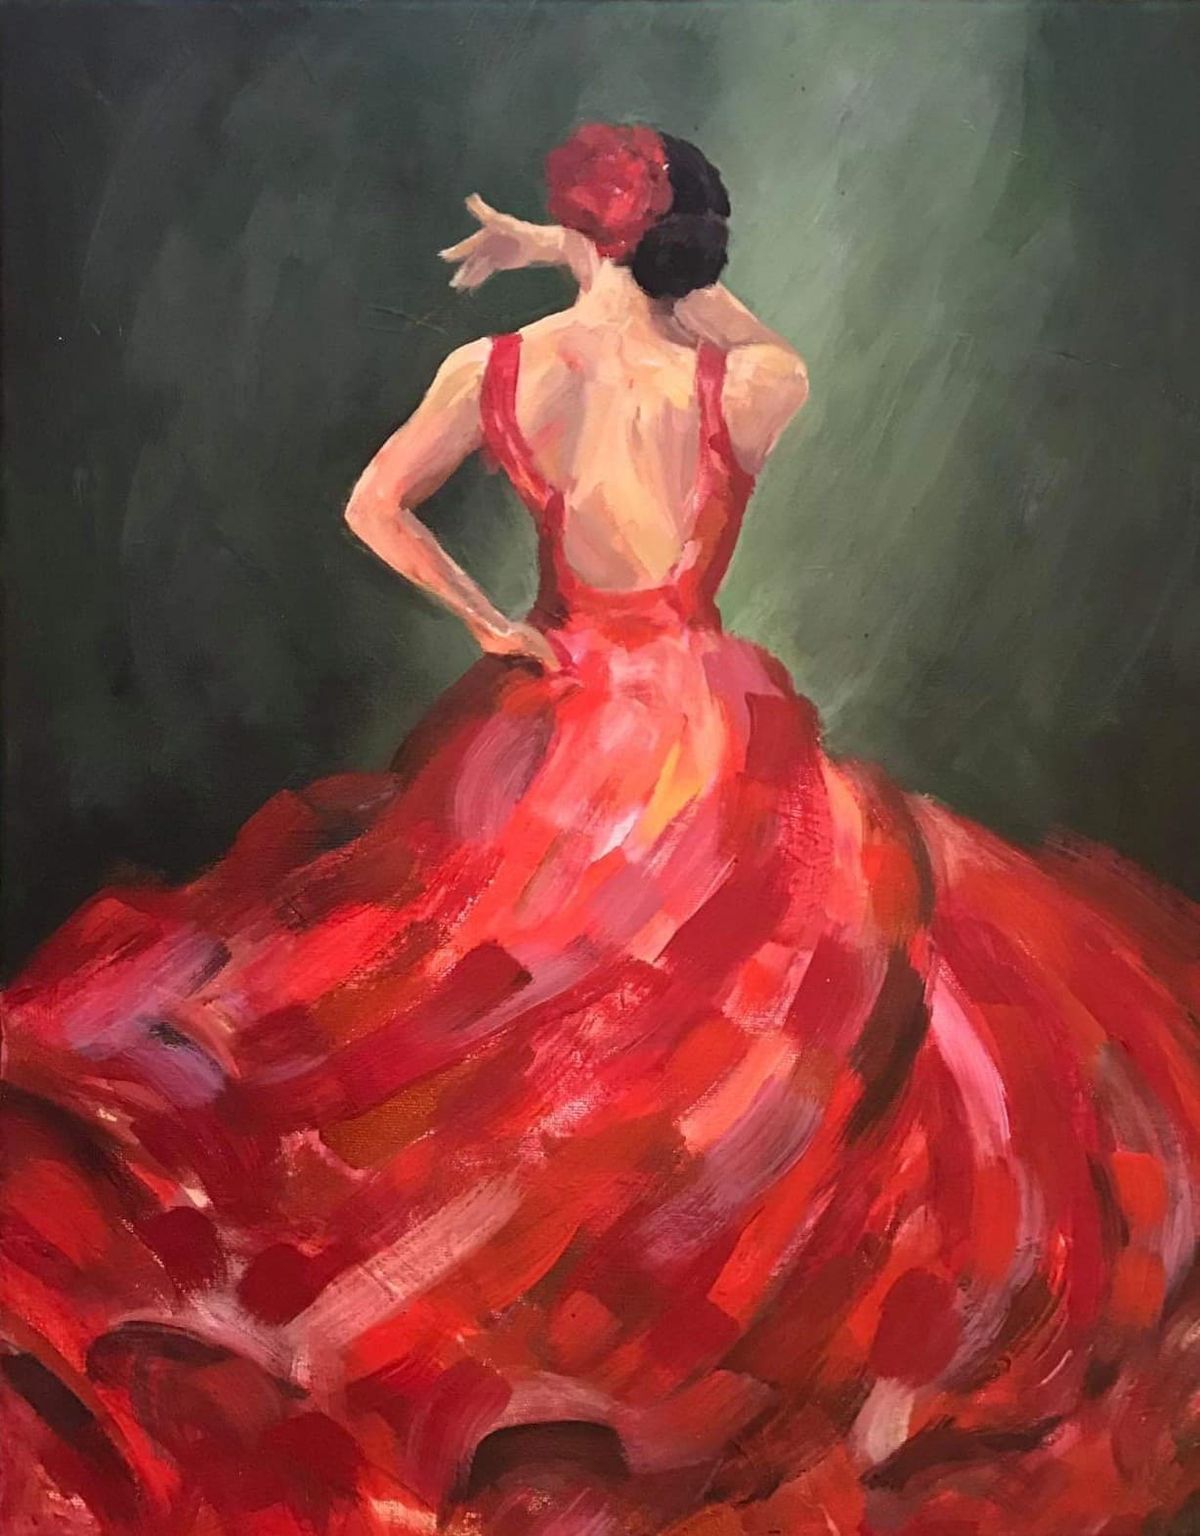 SIP AND CREATE: FLAMENCO DANCER PAINTING EVENT